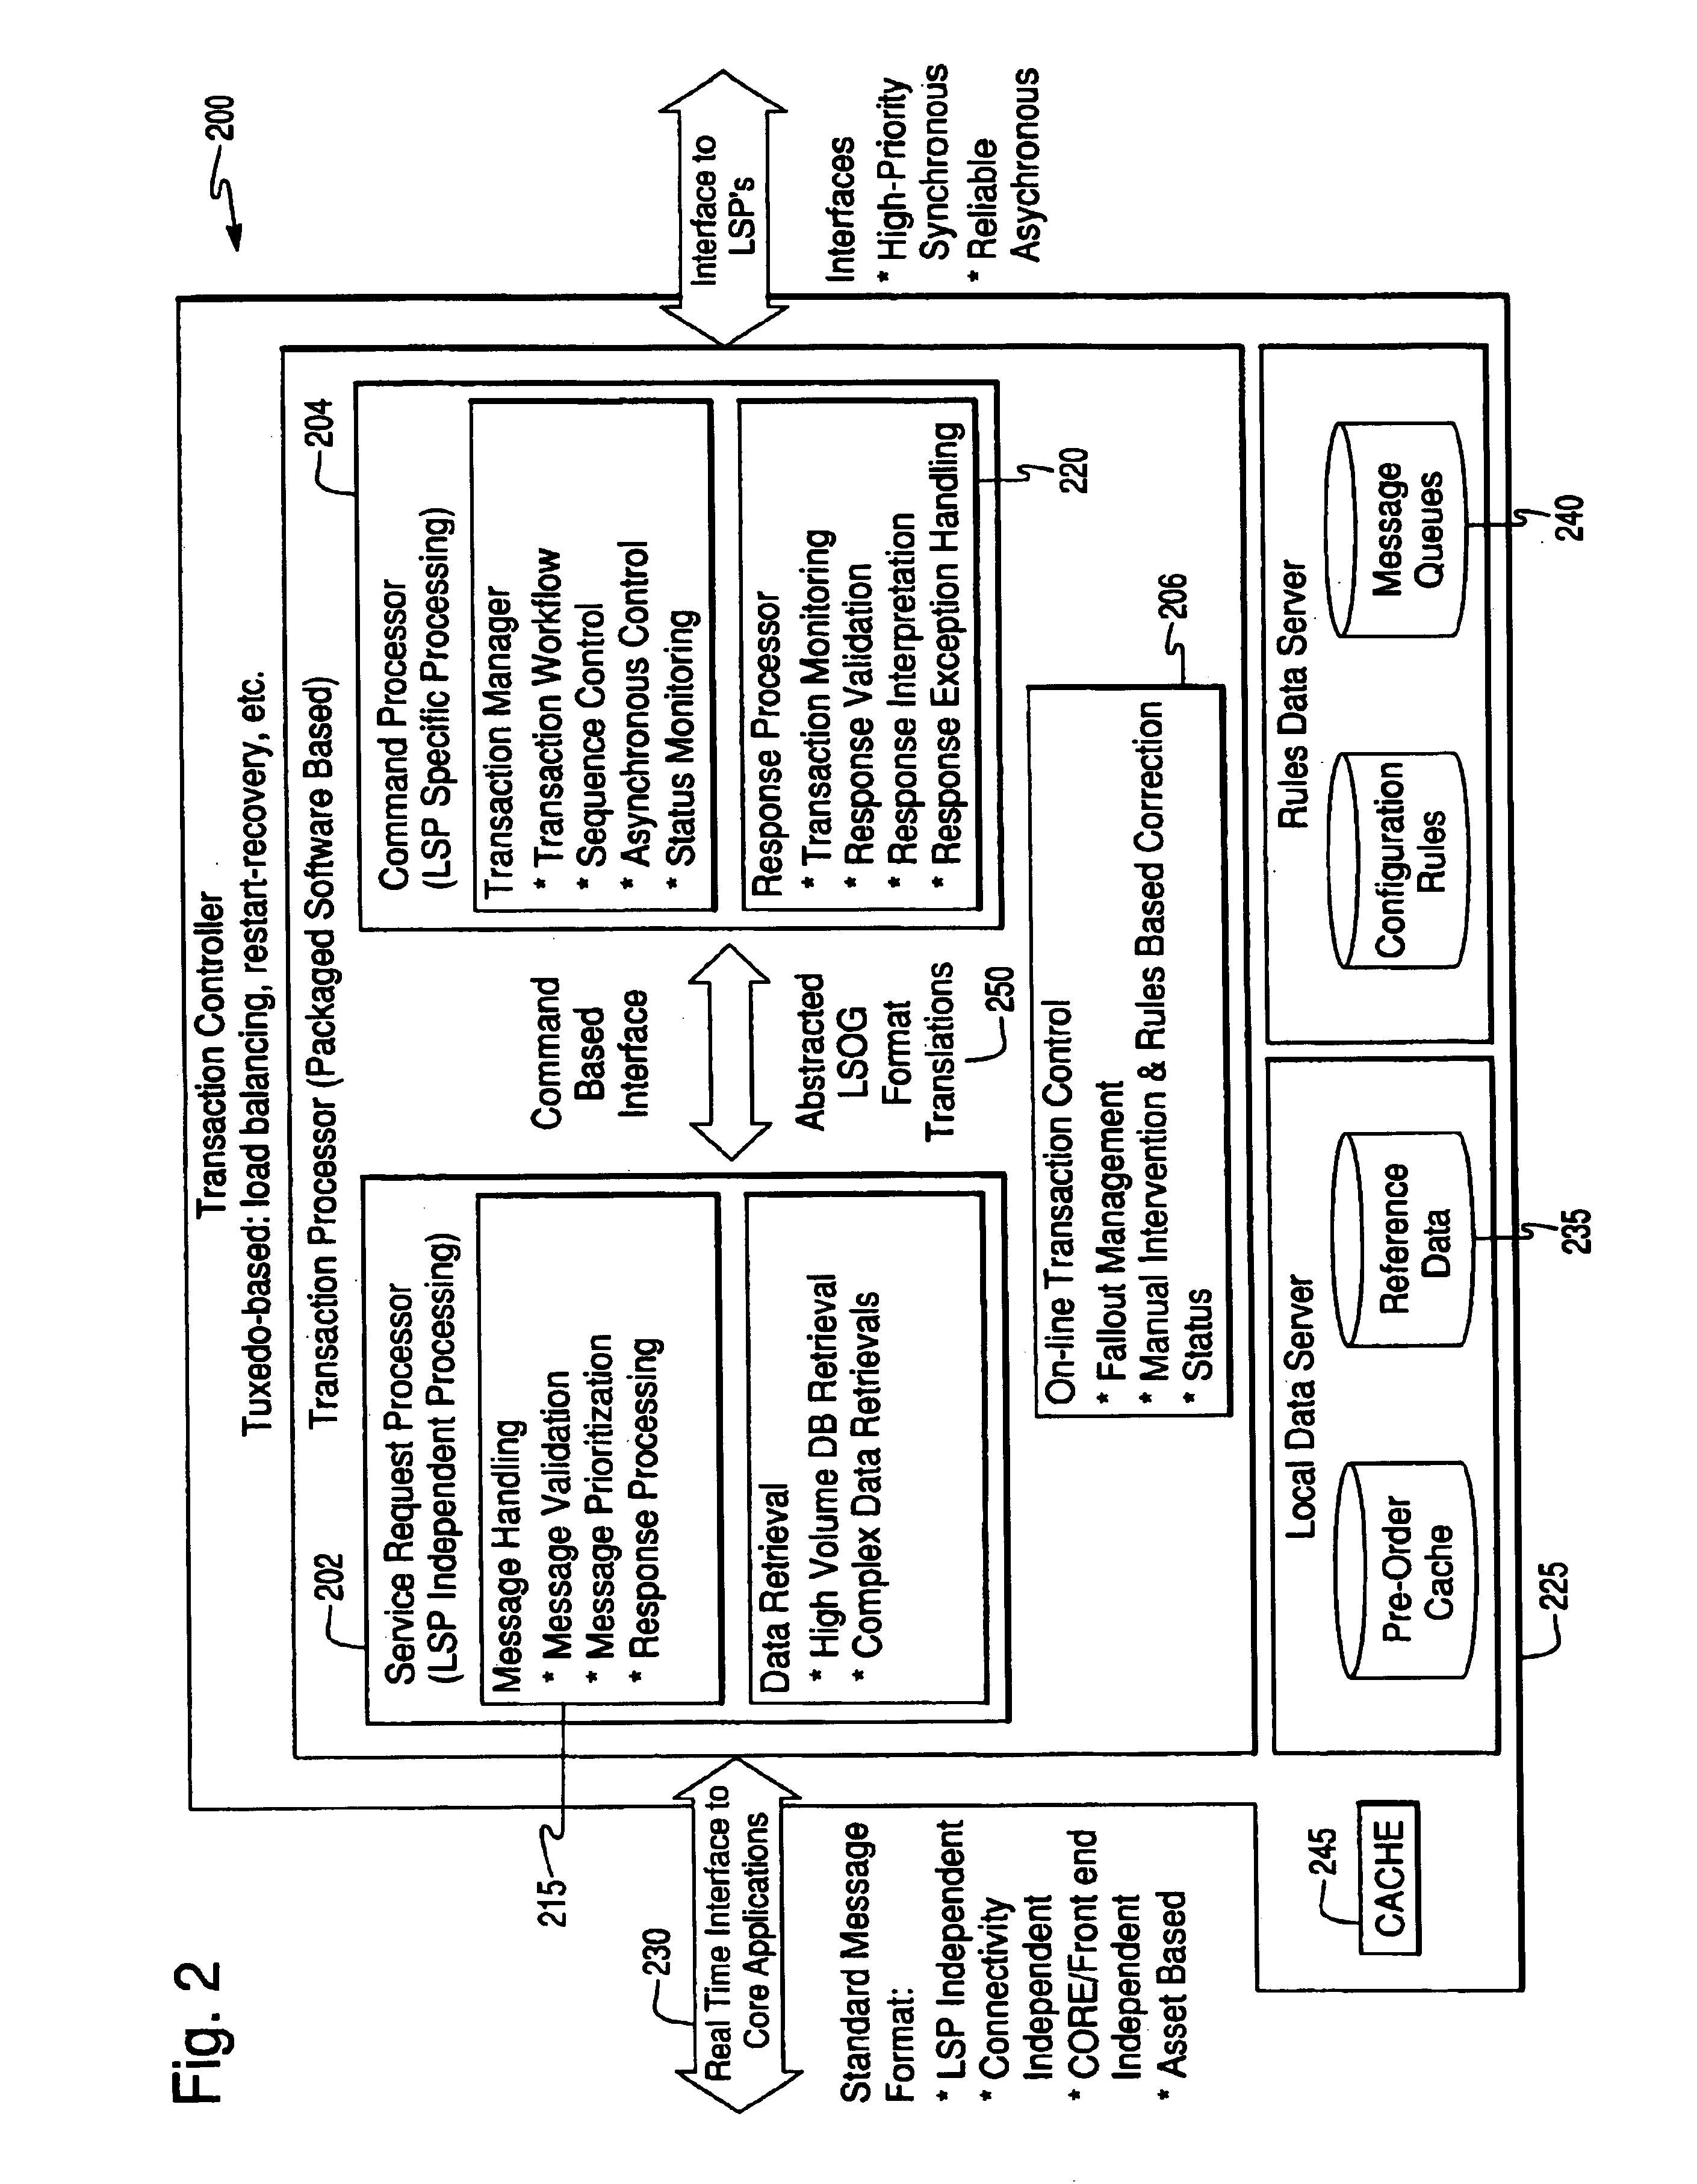 Management interface between a core telecommunication system and a local service provider